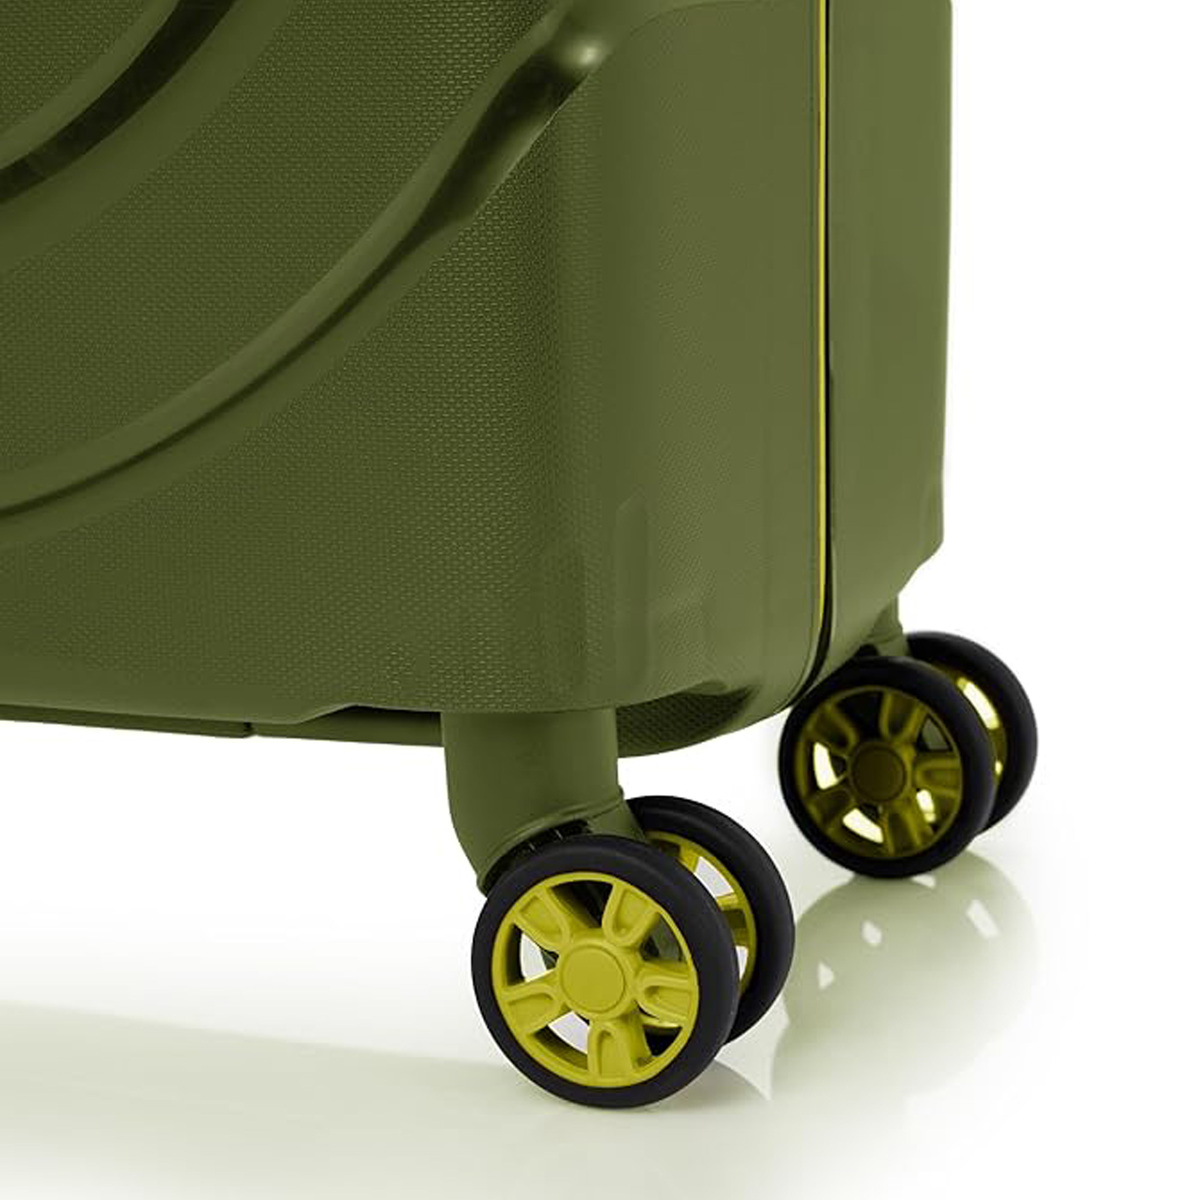 American Tourister Circurity Spinner Hard Trolley with TSA Combination Lock, 68 cm, Olive Green